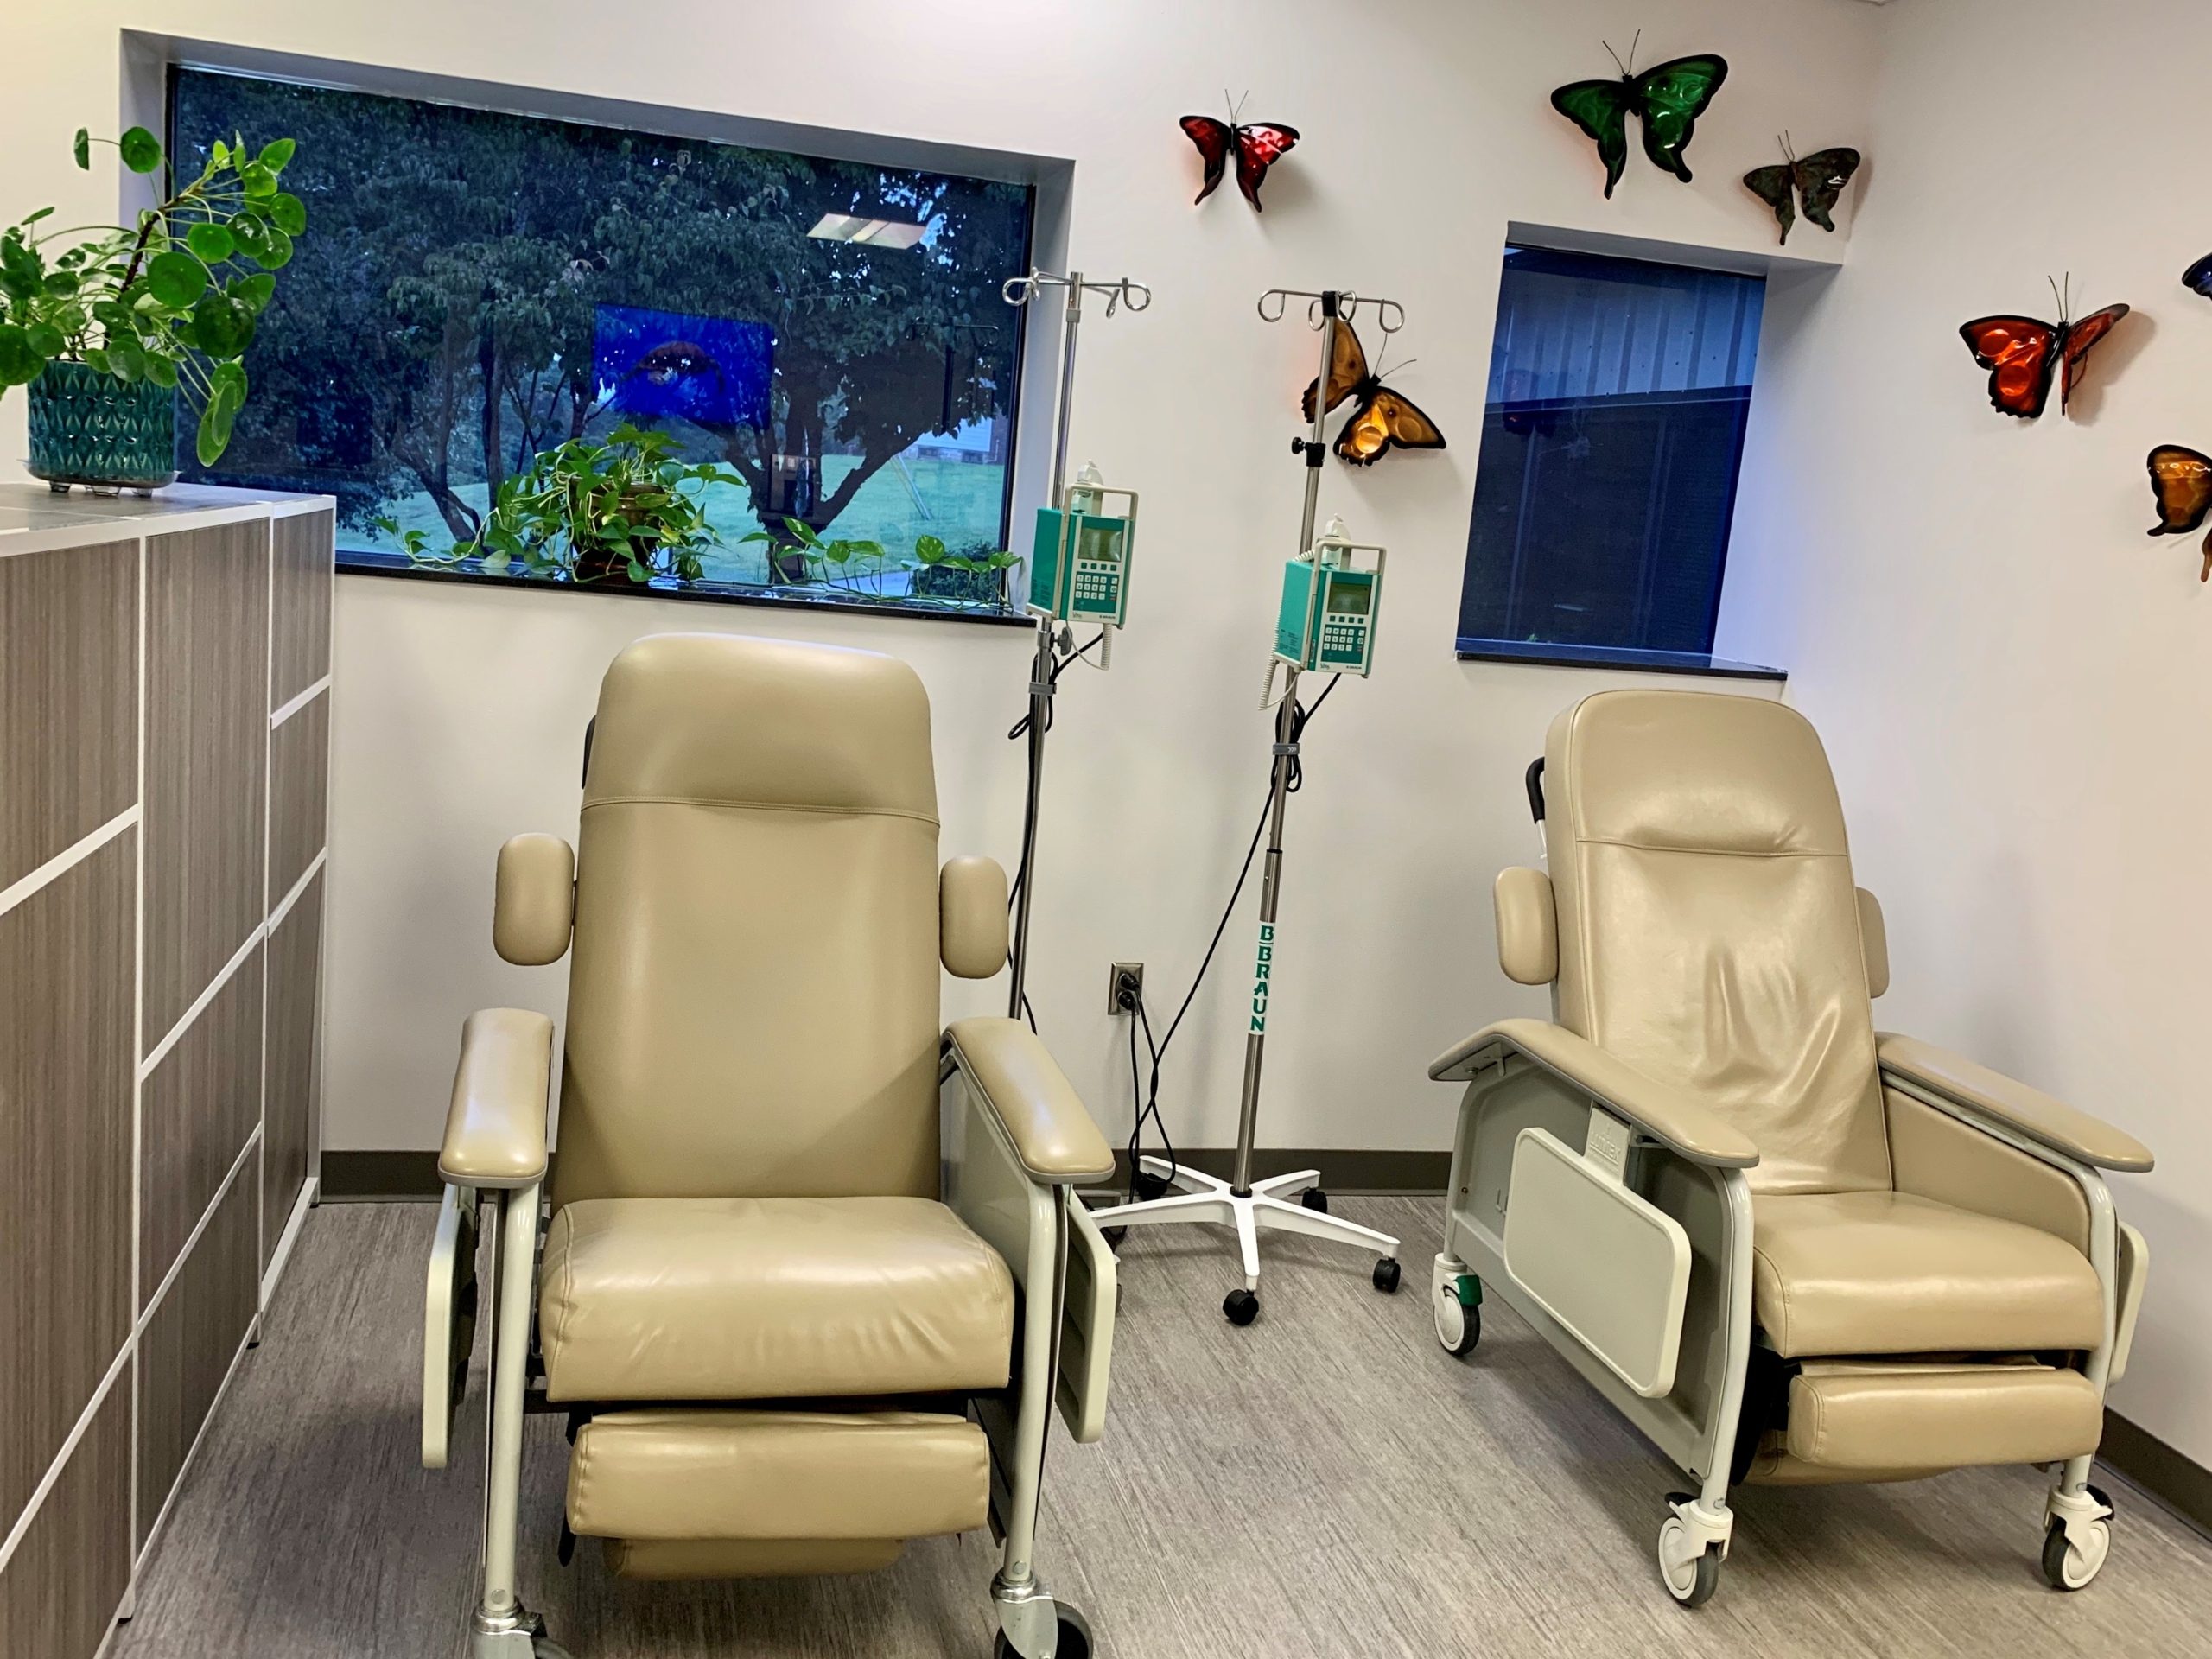 Infusion Therapy Services Provided at Prowers Medical Center